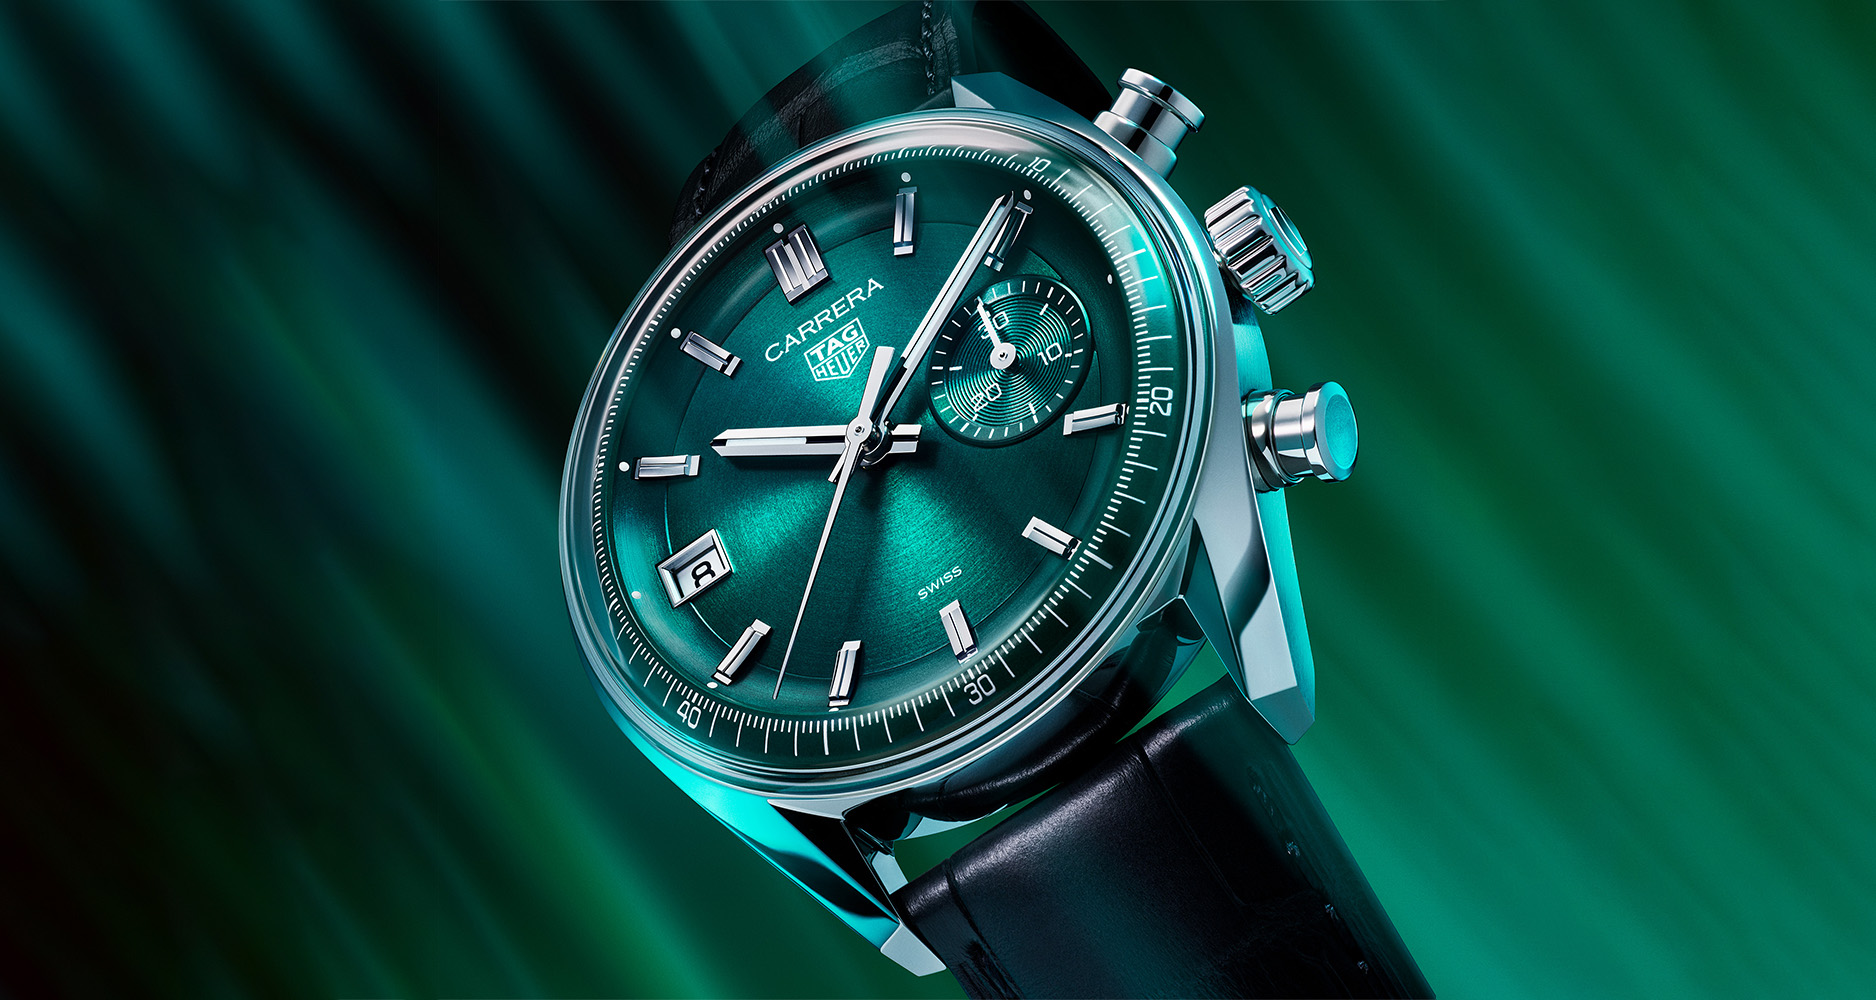 The TAG Heuer Carrera Chronograph in a teal blue dial.